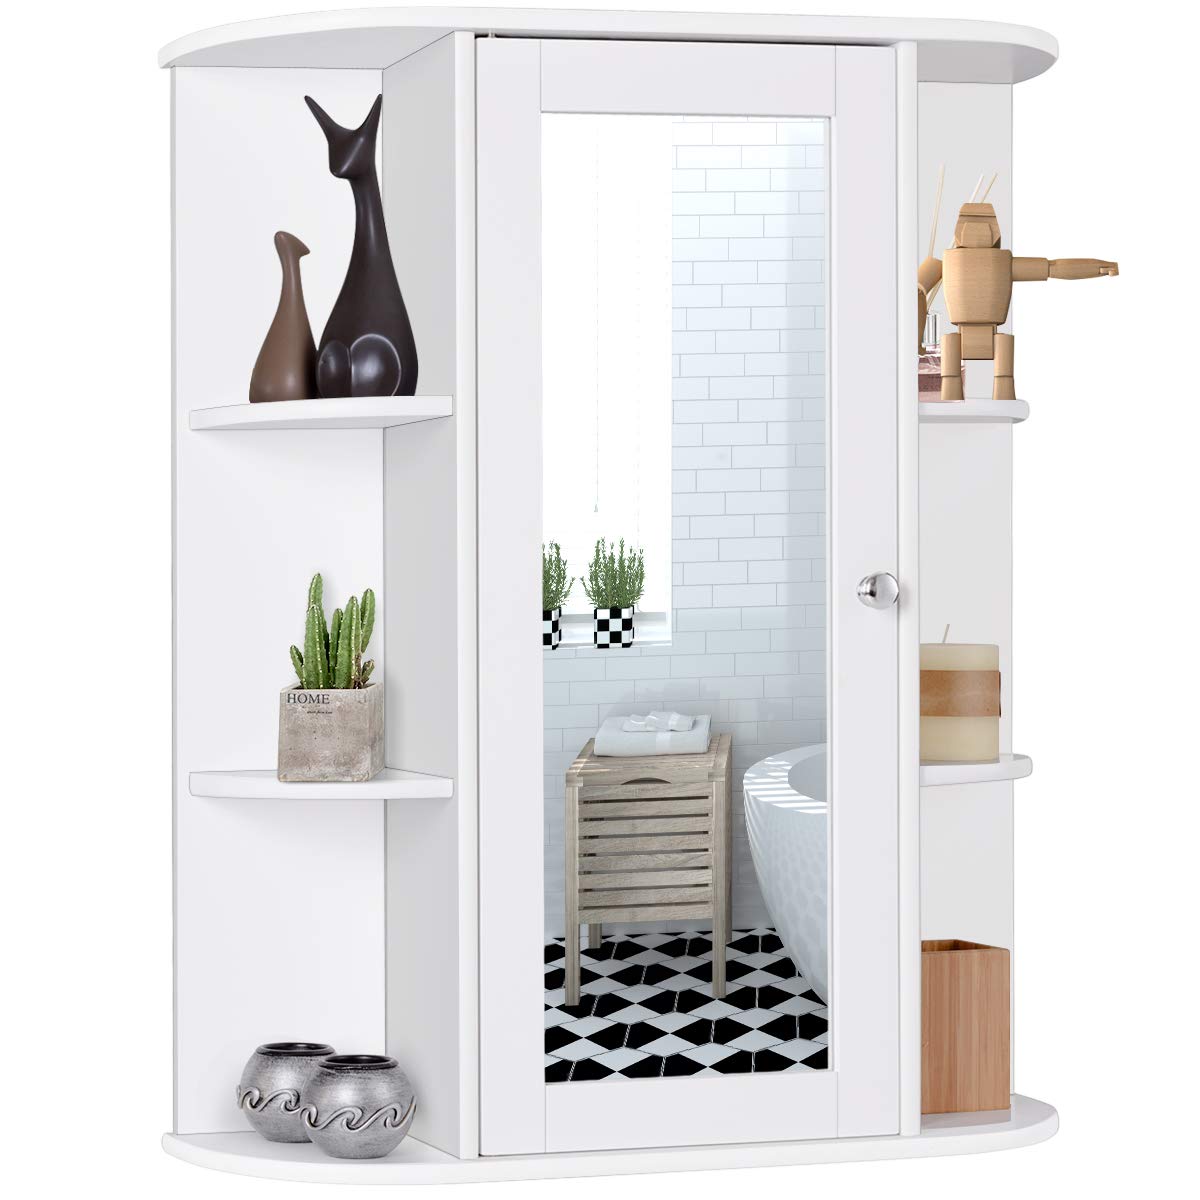 Bathroom Storage Cabinet, Medicine Cabinets for Bathroom with Mirror, 2  Doors 4 Adjustable Shelf + 3 Christmas Style Storage Basket, White Wood  Cabinet Wall Mounted for Bathroom Laundry Room Kitchen